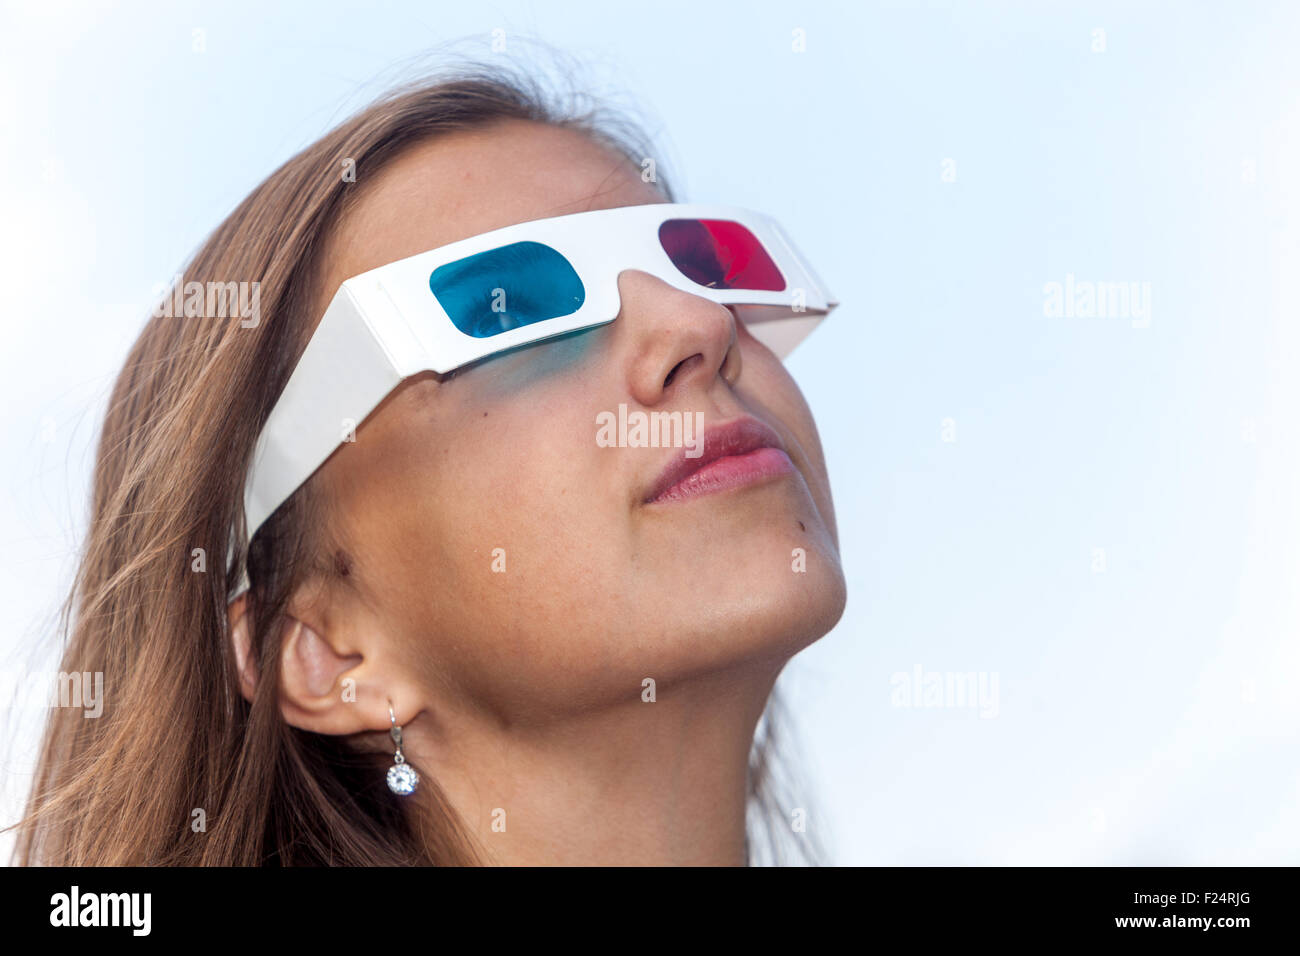 Young girl with 3D glasses teeneger lifestyle, 15-16 years old Stock Photo